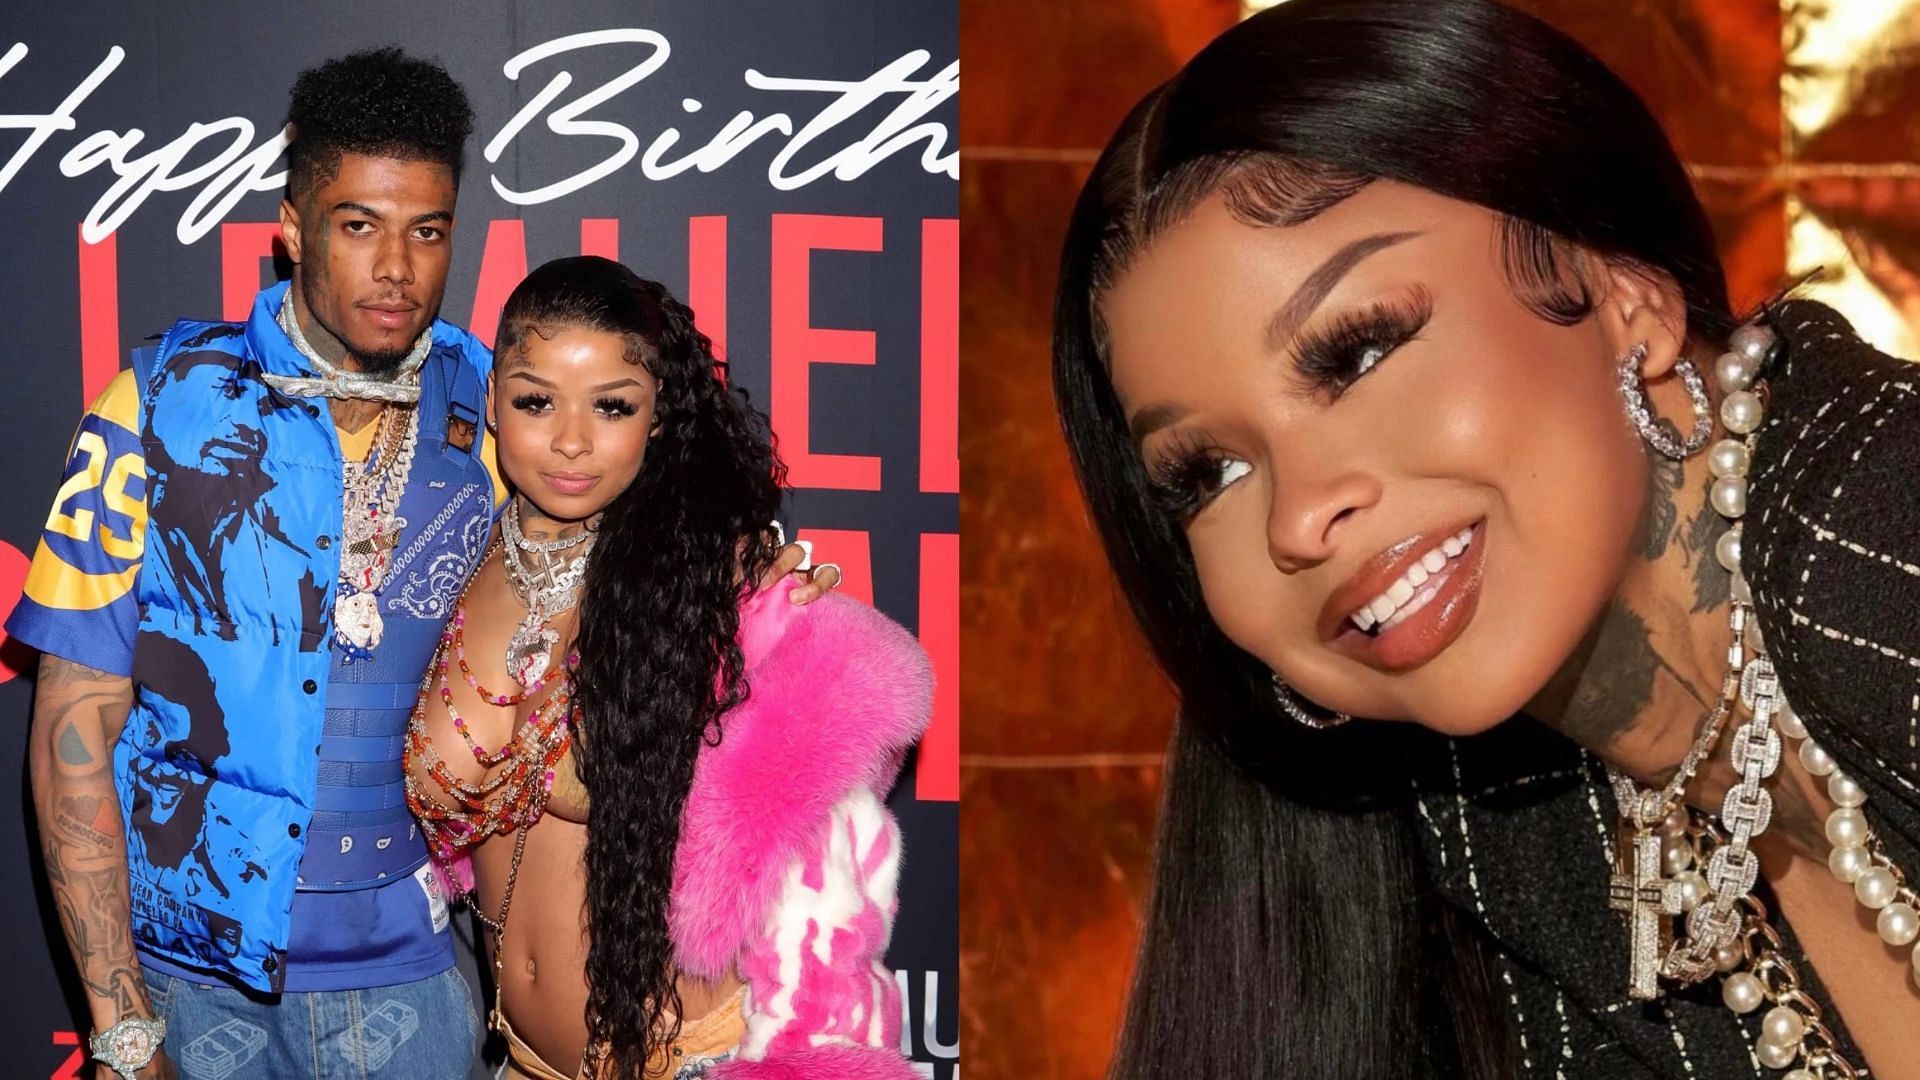 Maybe the baby's future will have some hope then": Chrisean and Blueface baby daddy drama explored as former's Twitter likes go viral